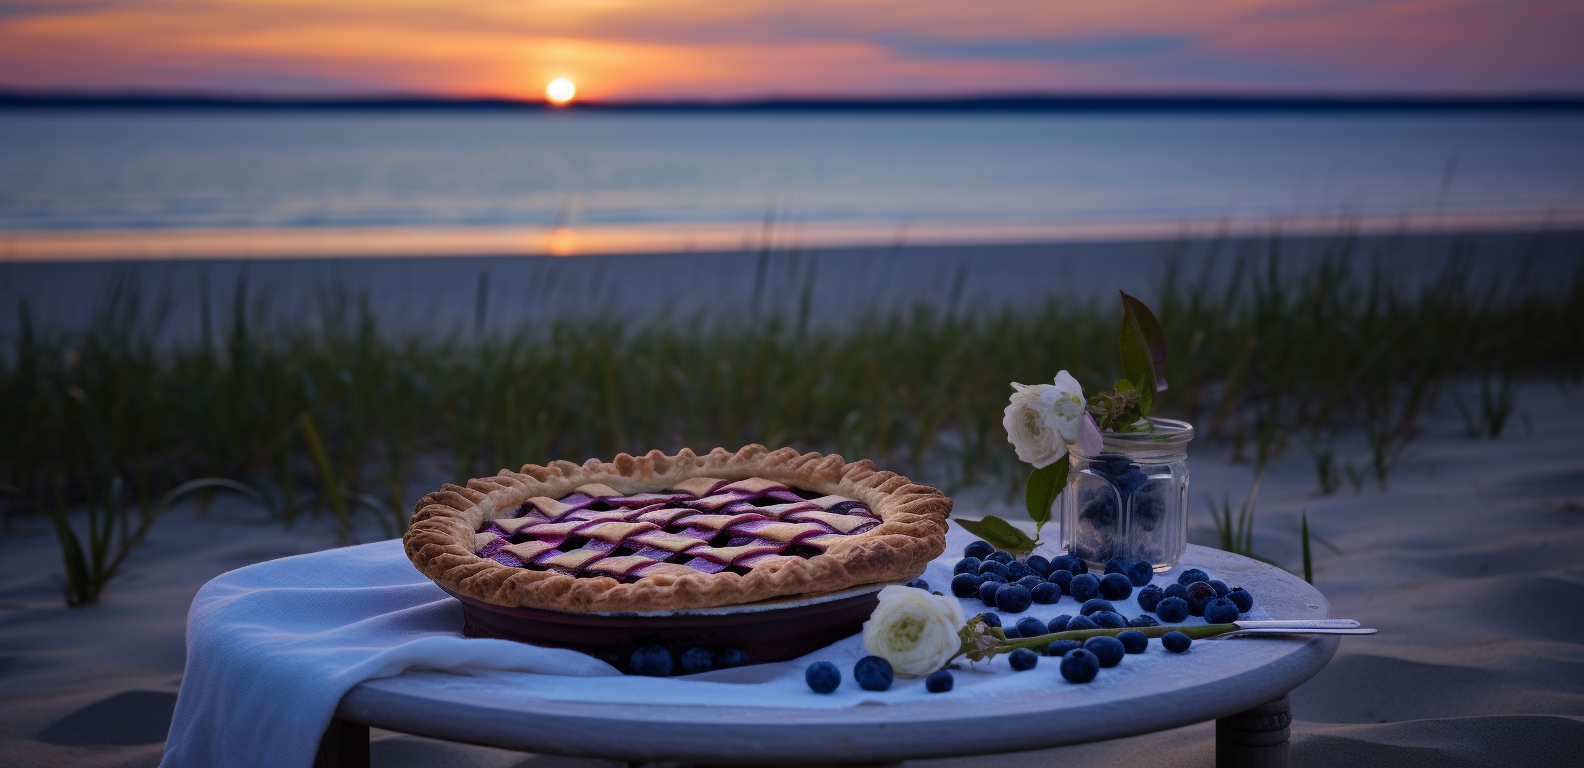 Cape Cod Blueberry Pie By The Sea